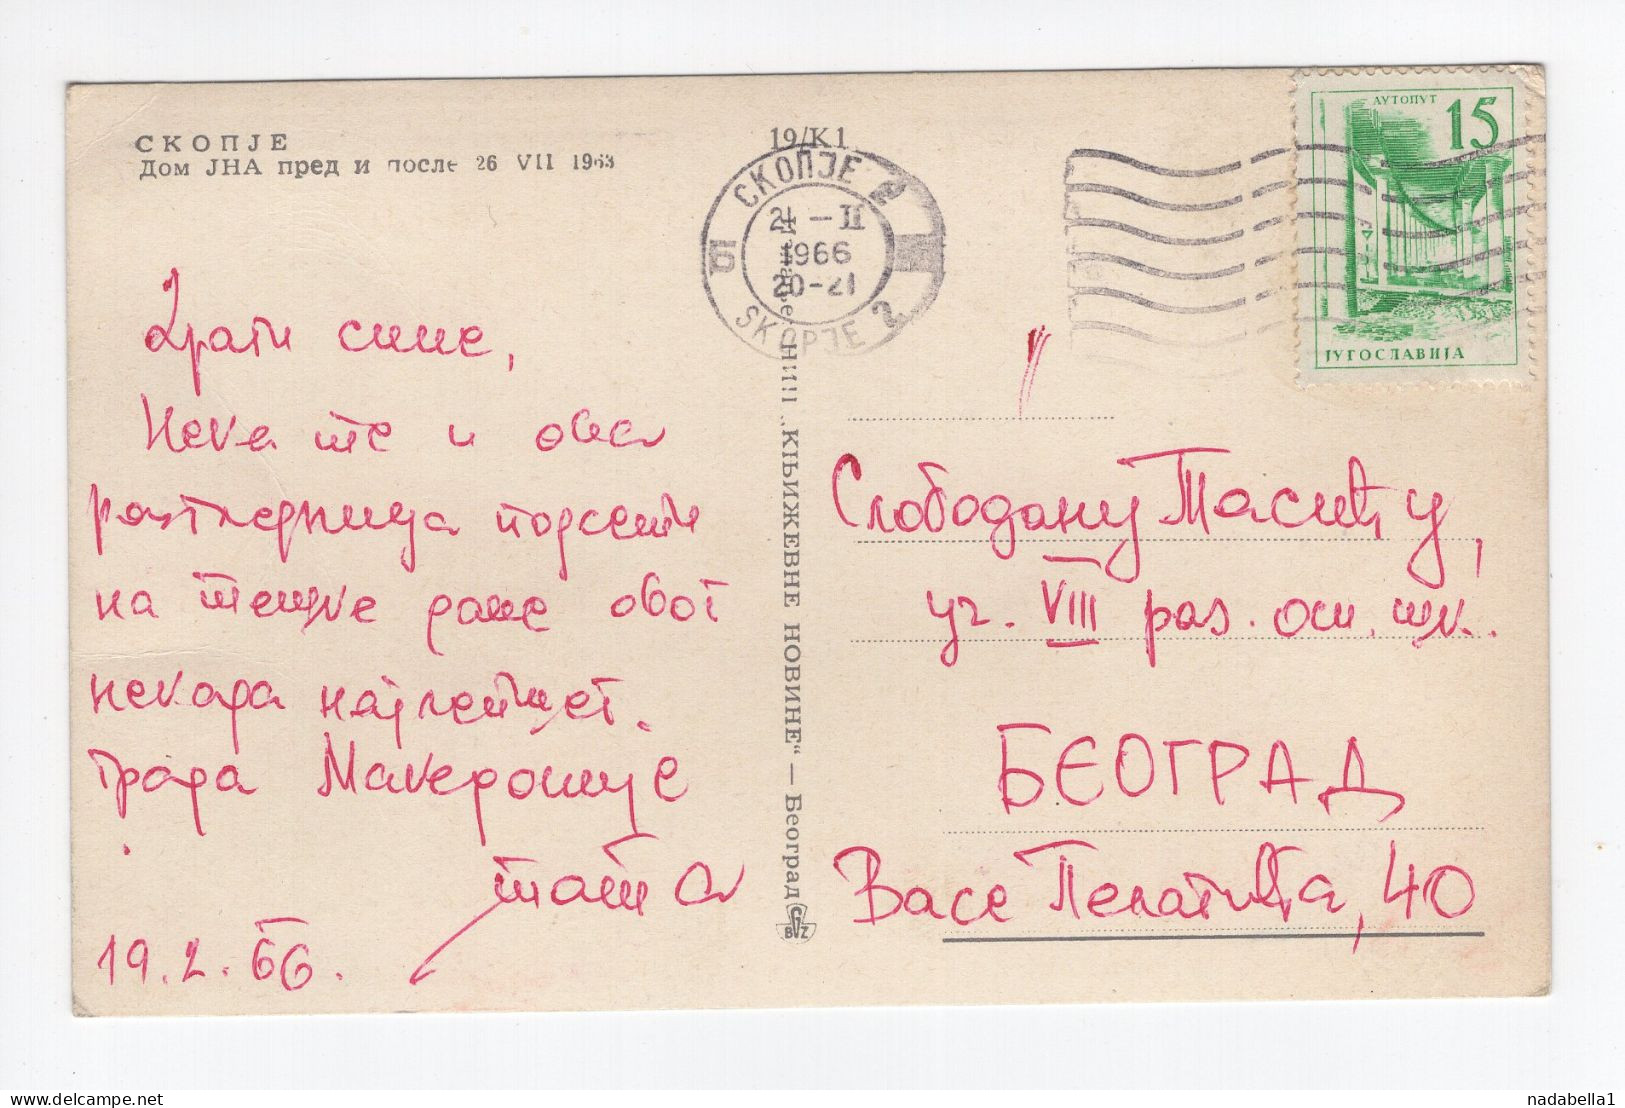 1966. YUGOSLAVIA,MACEDONIA,SKOPJE,ARMY HALL BEFORE AND AFTER 1963. EARTHQUAKE,MULTI VIEW POSTCARD,USED - Yougoslavie